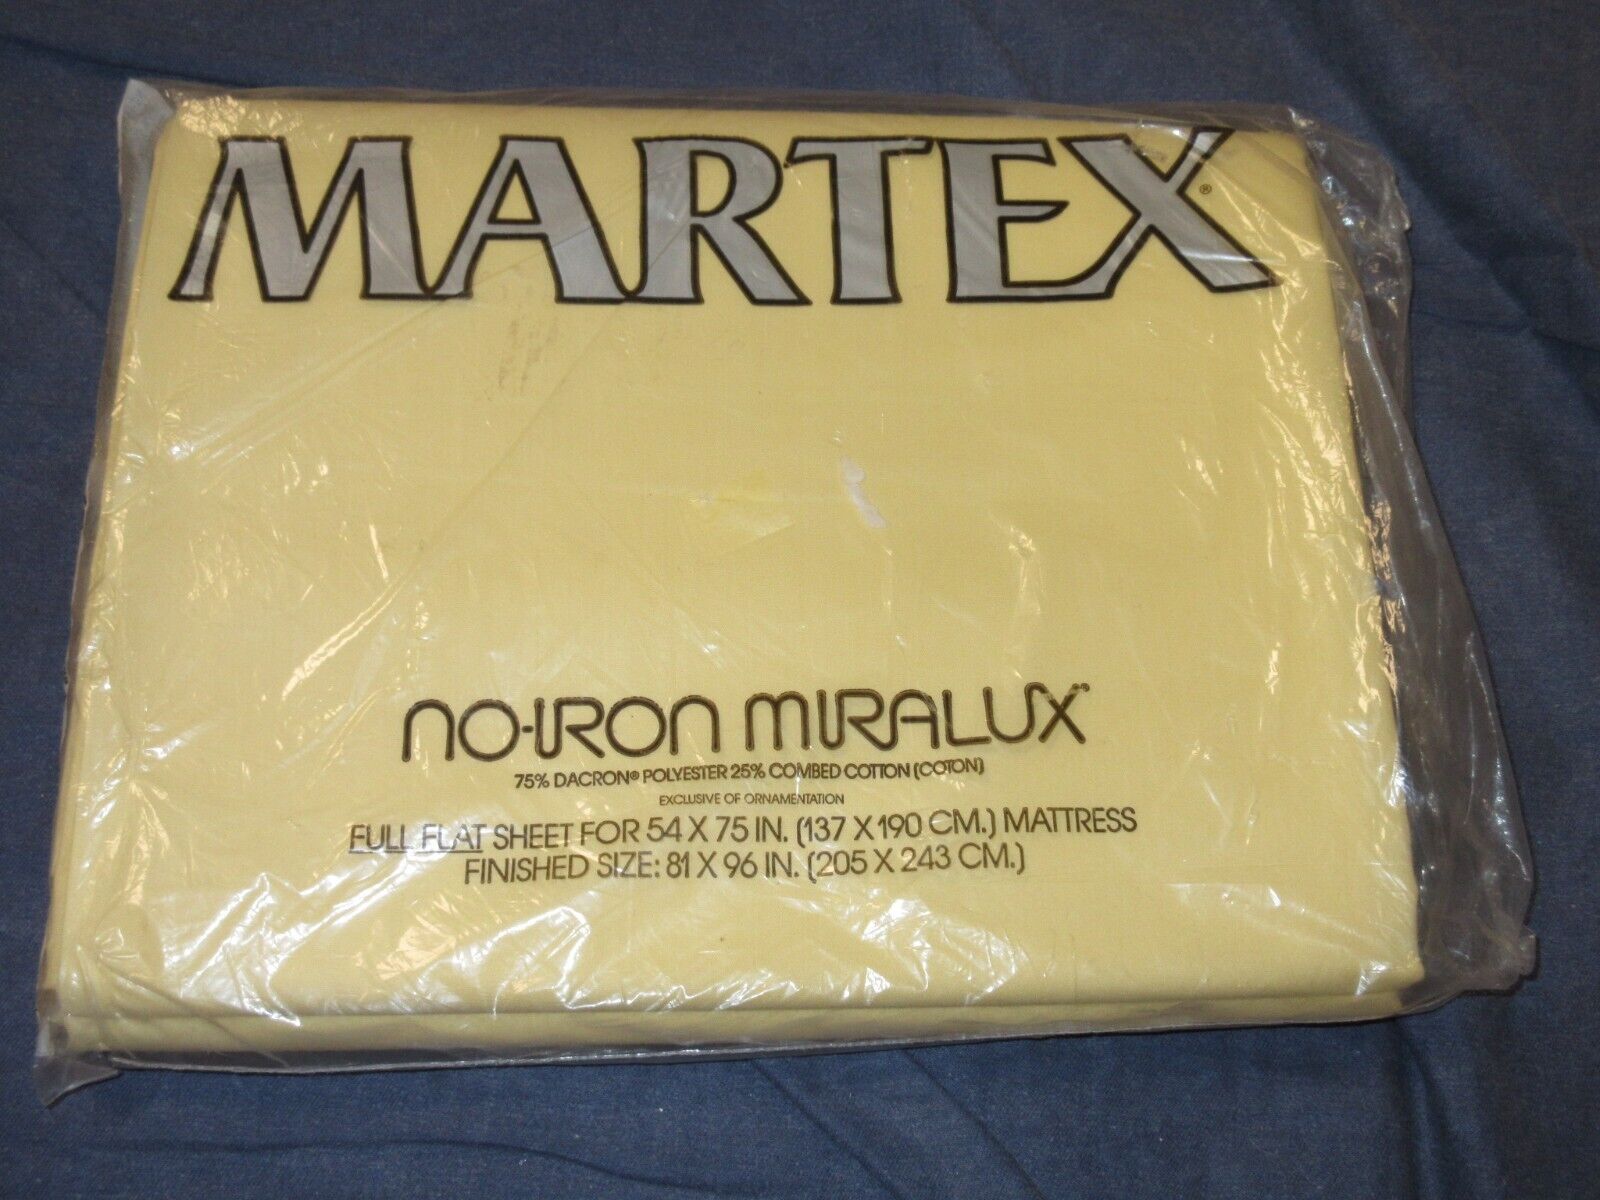 NEW Vintage Full Double Flat Sheet by MARTEX - Solid Yellow - No-Iron Miralux